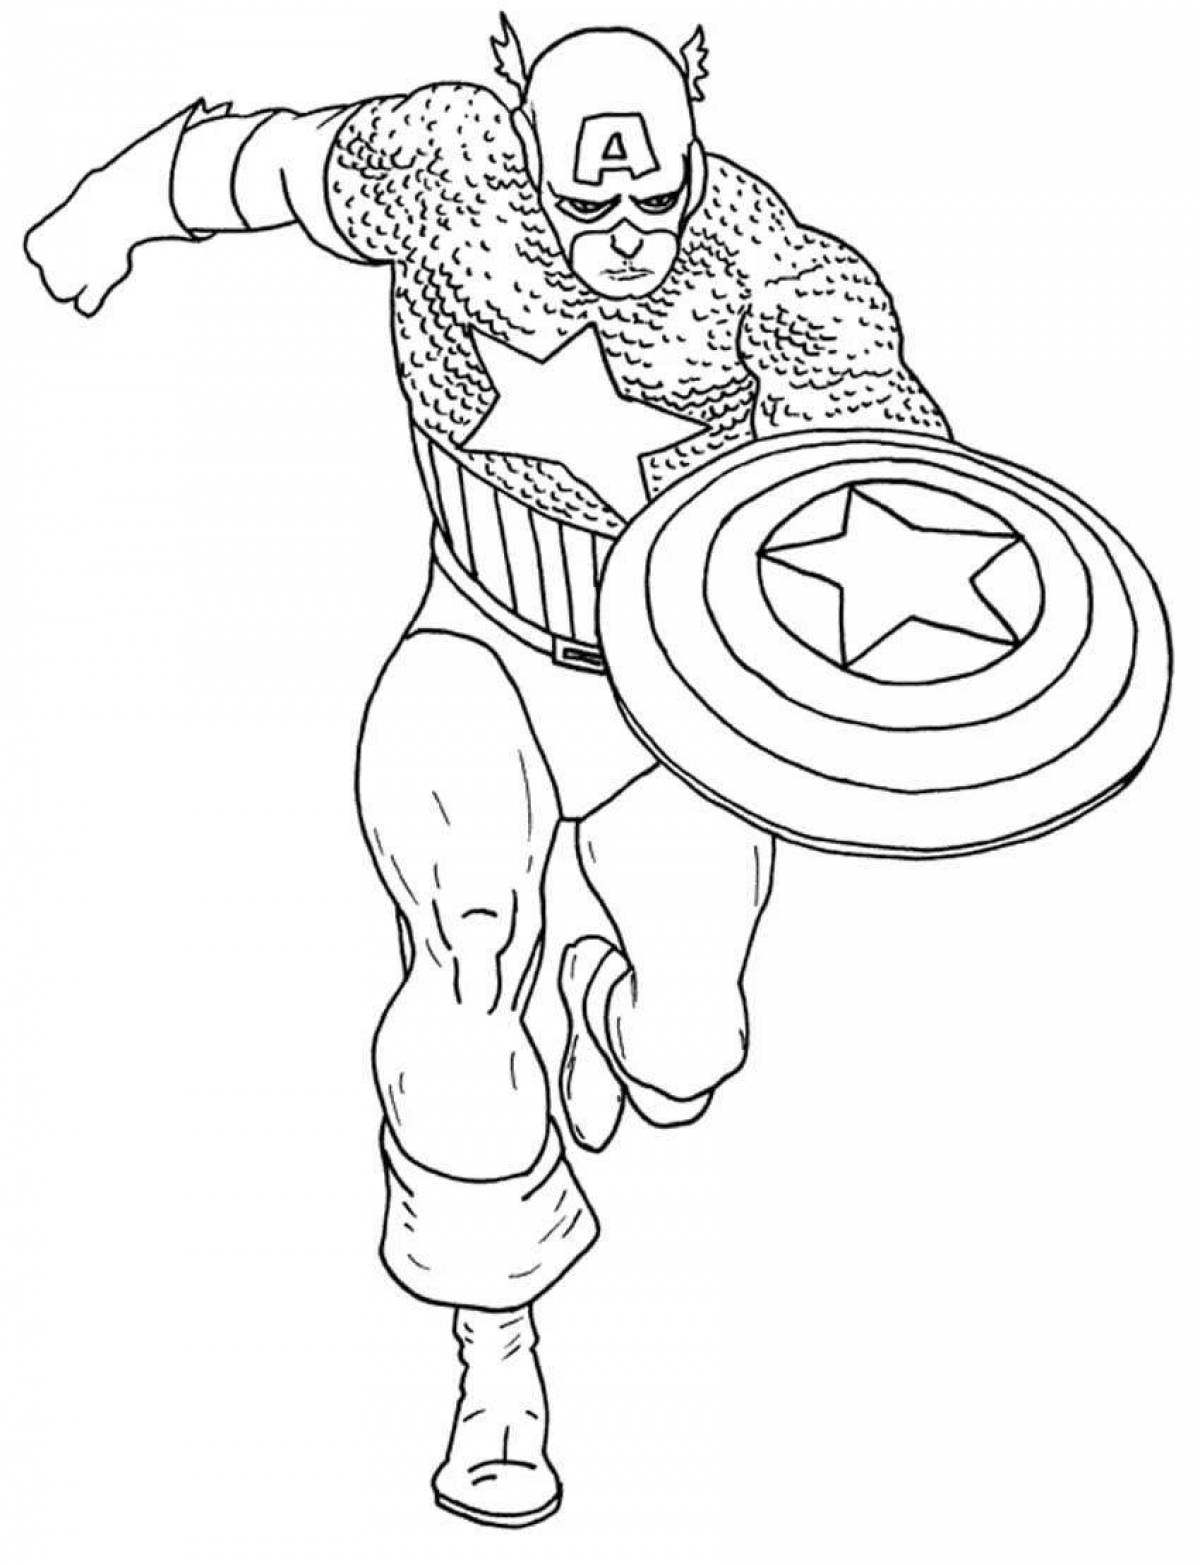 Sweet marvel coloring book for kids